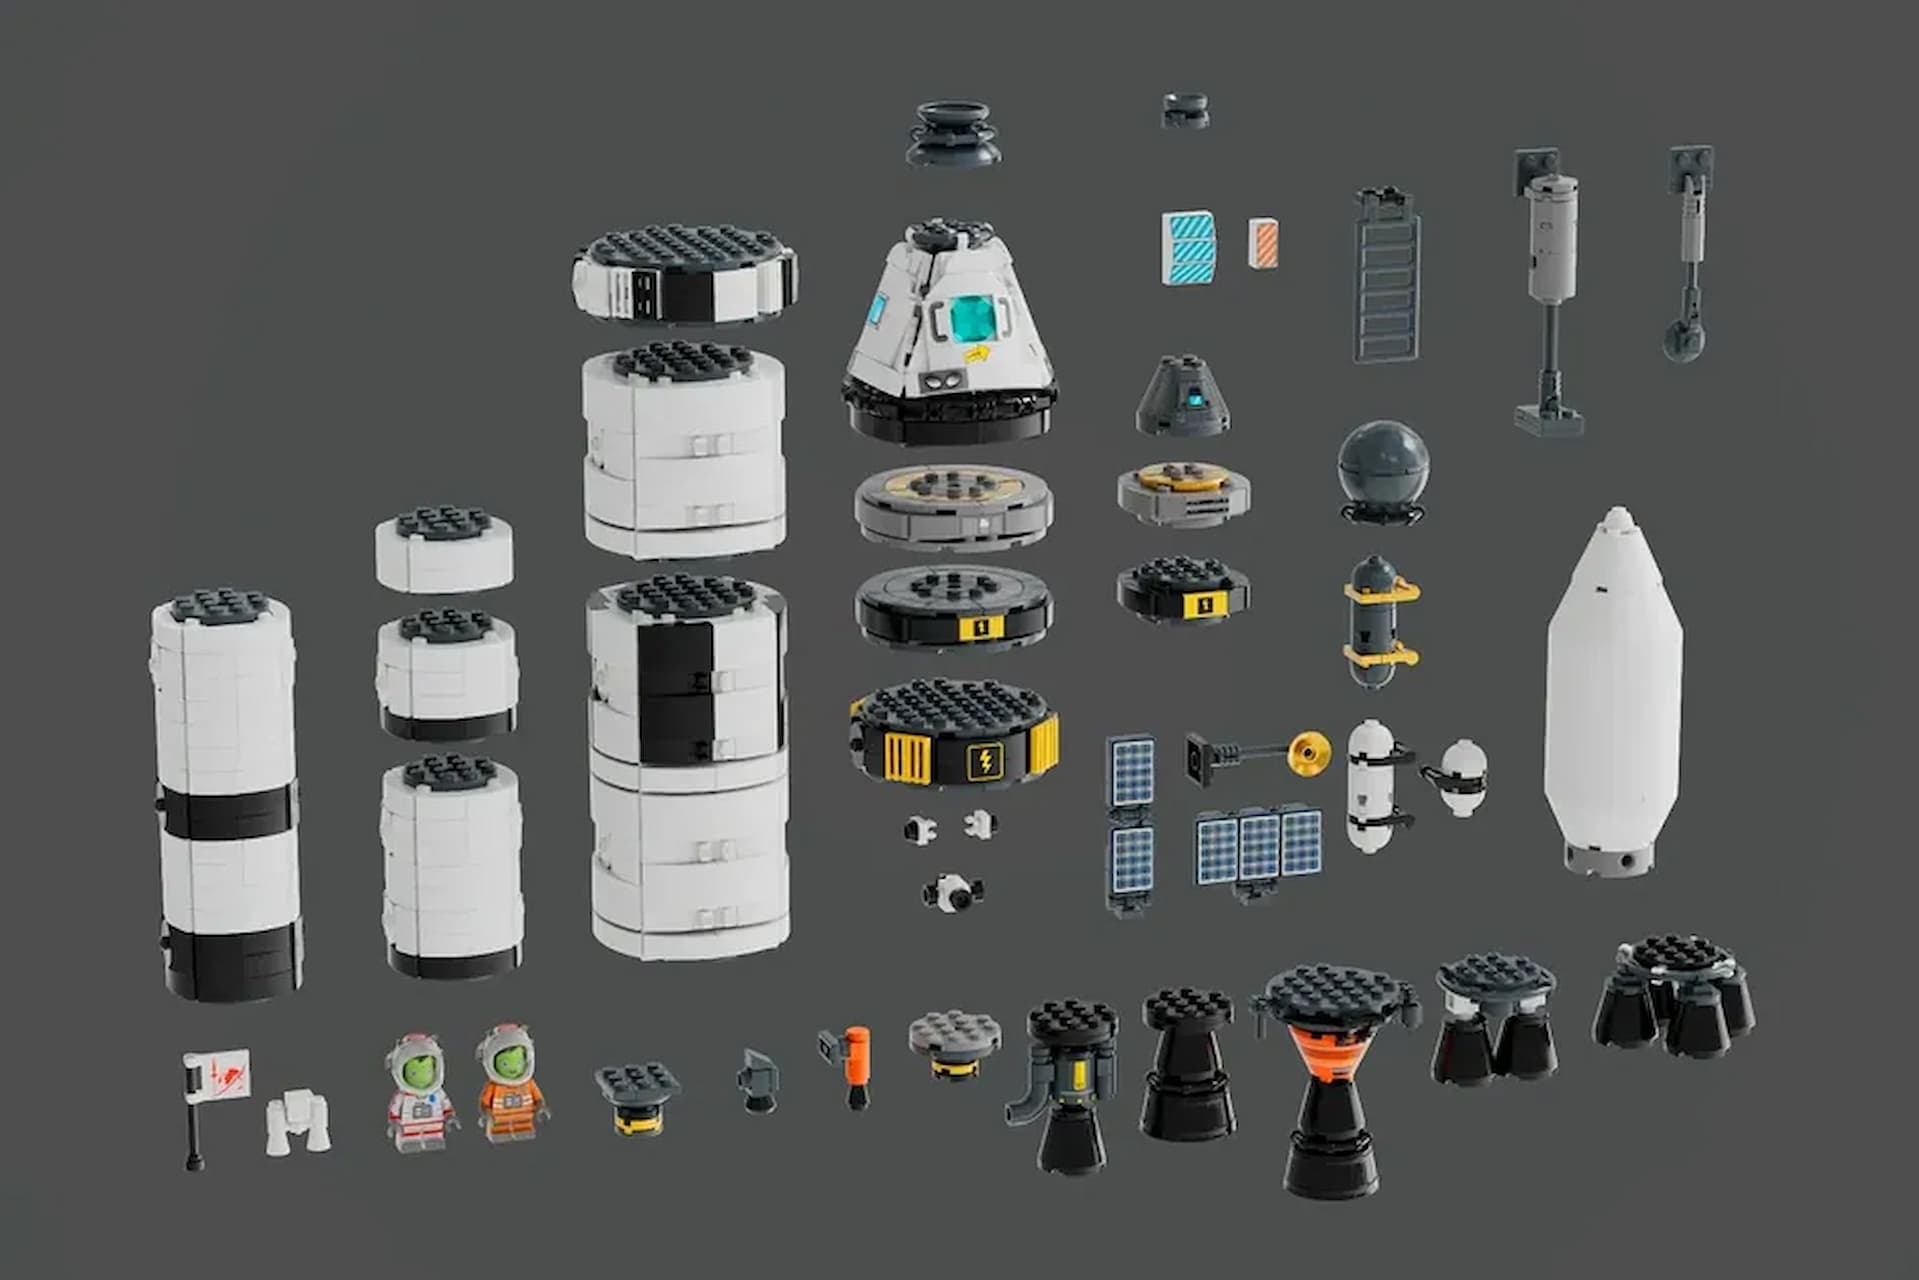 Concept images of the Lego Ideas Kerbal Space Program submission